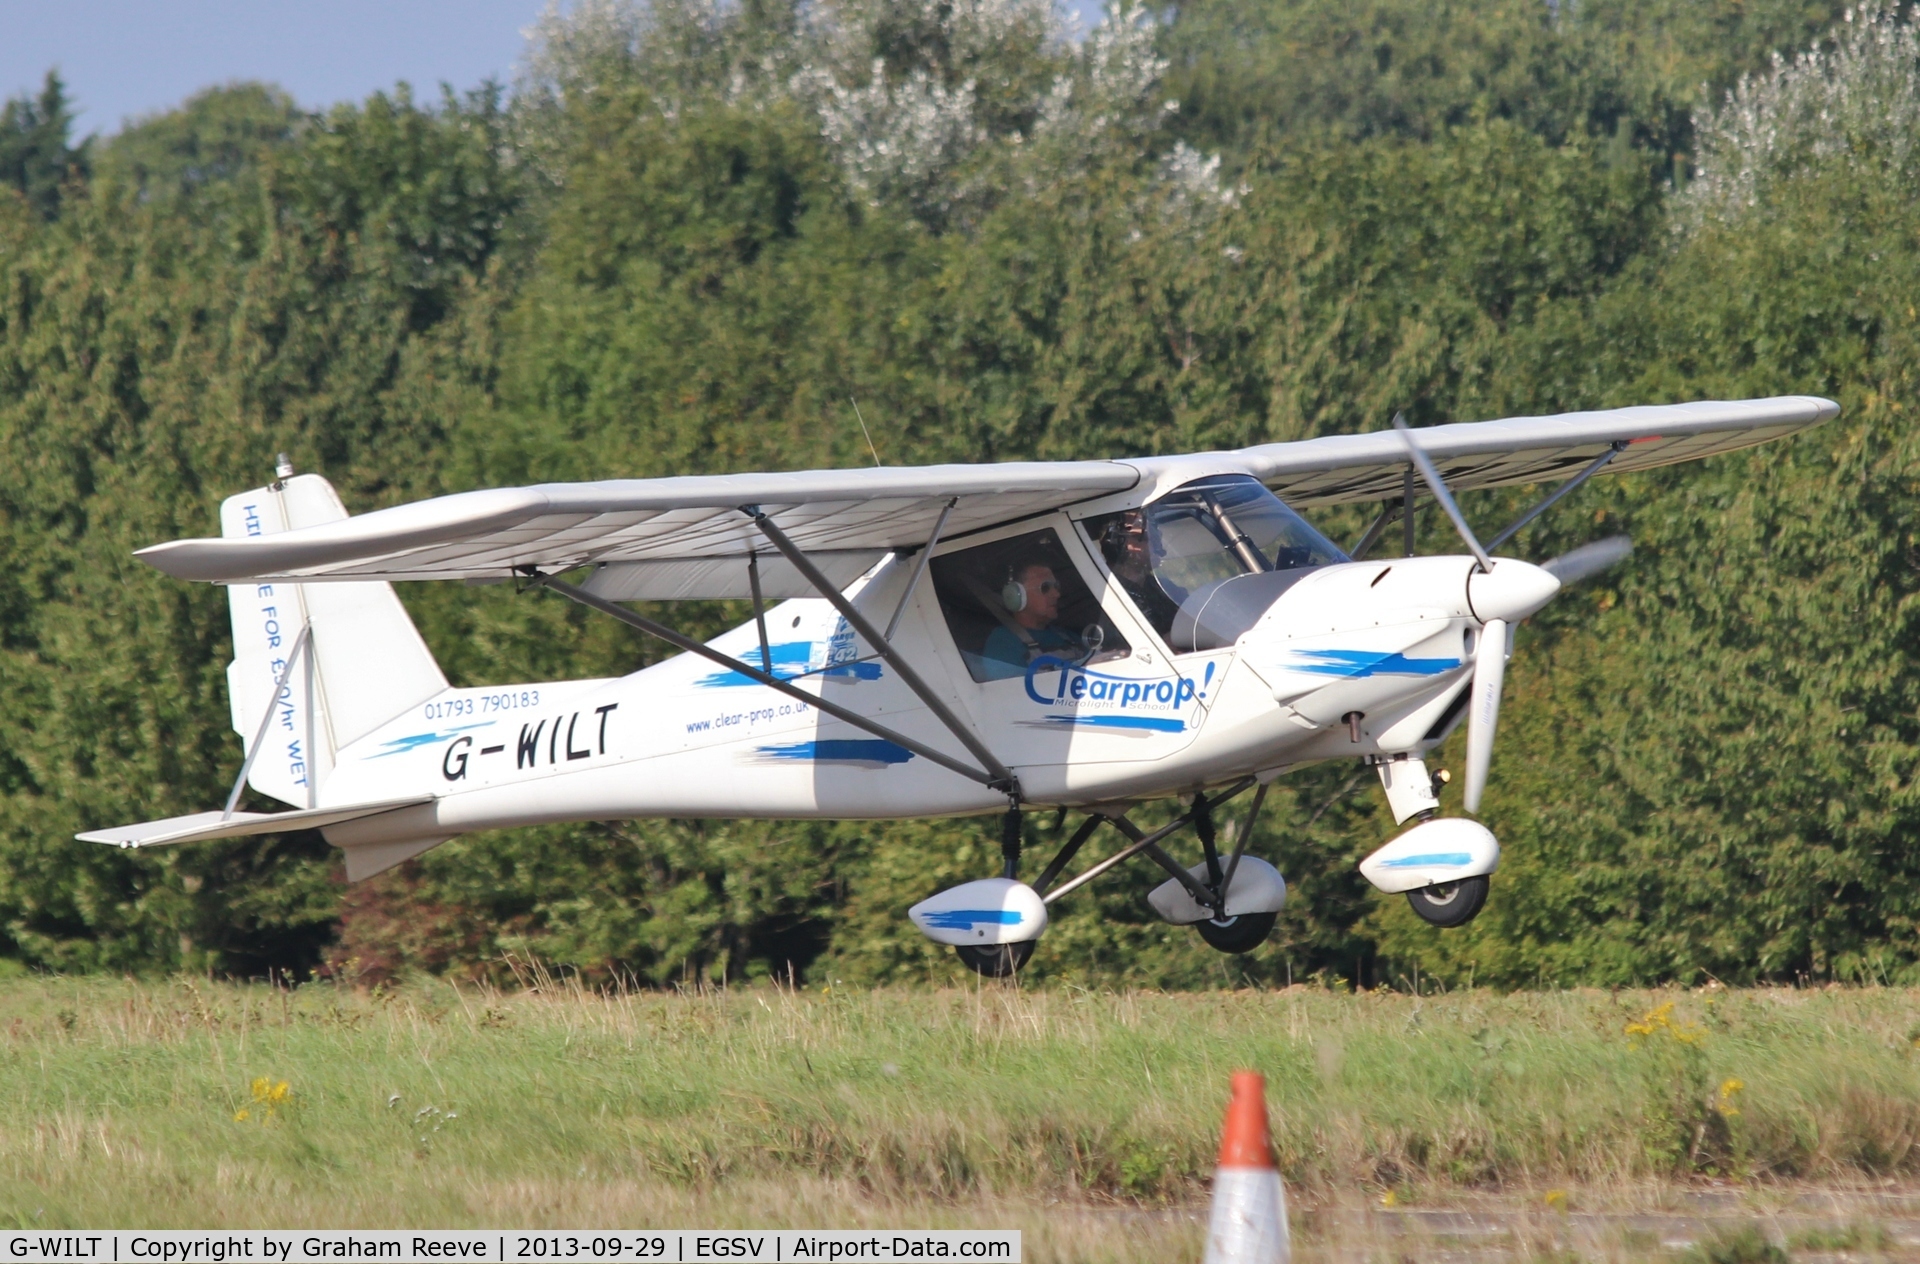 G-WILT, 2005 Comco Ikarus C42 FB100 C/N 0506-6687, About to touch down.